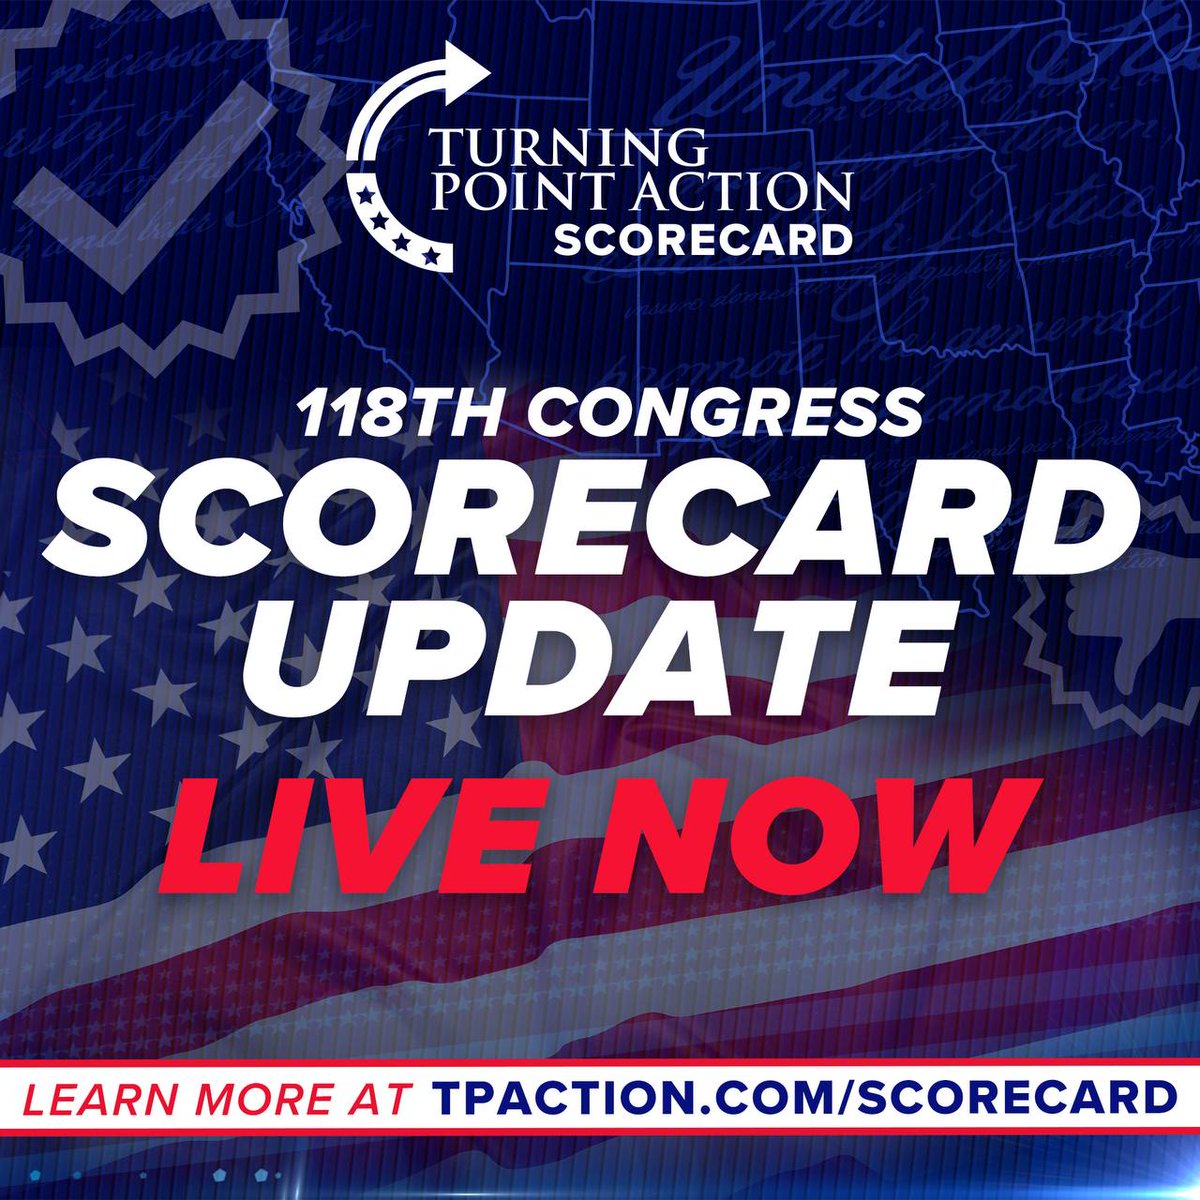 We just updated our 2023 scorecard!

The ONLY scorecard where you can see how your representatives are voting in REAL-TIME!

Have your representatives been voting 100% against tyranny?

➡️ Find out at tpaction.com/scorecard